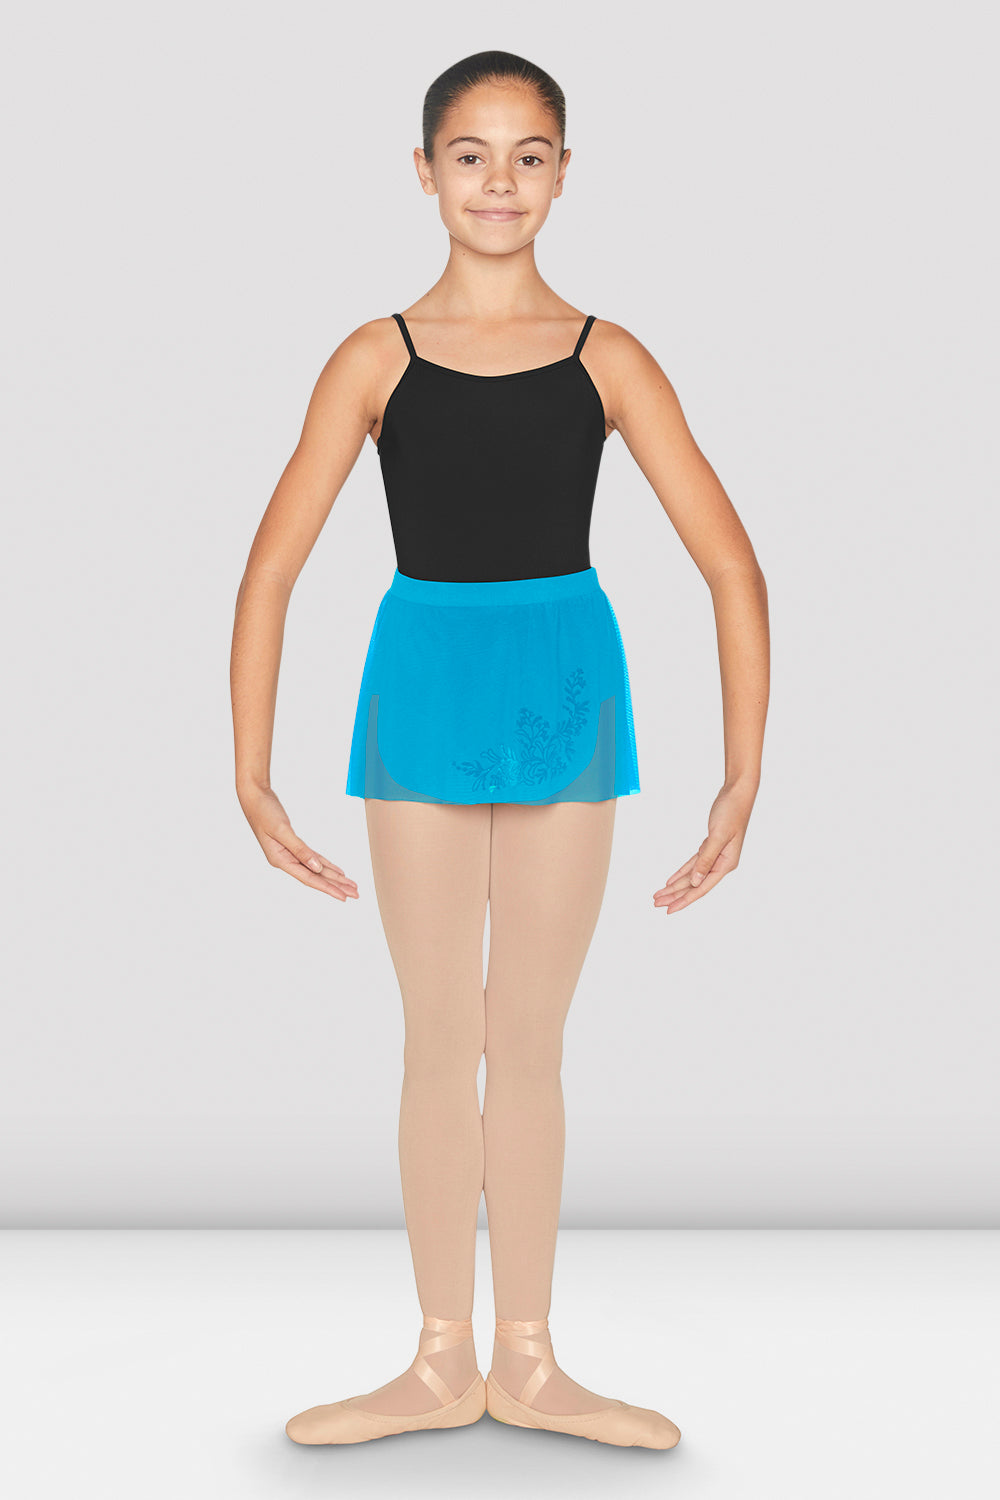 A young female dancer wearing the BLOCH Kristina wrap skirt